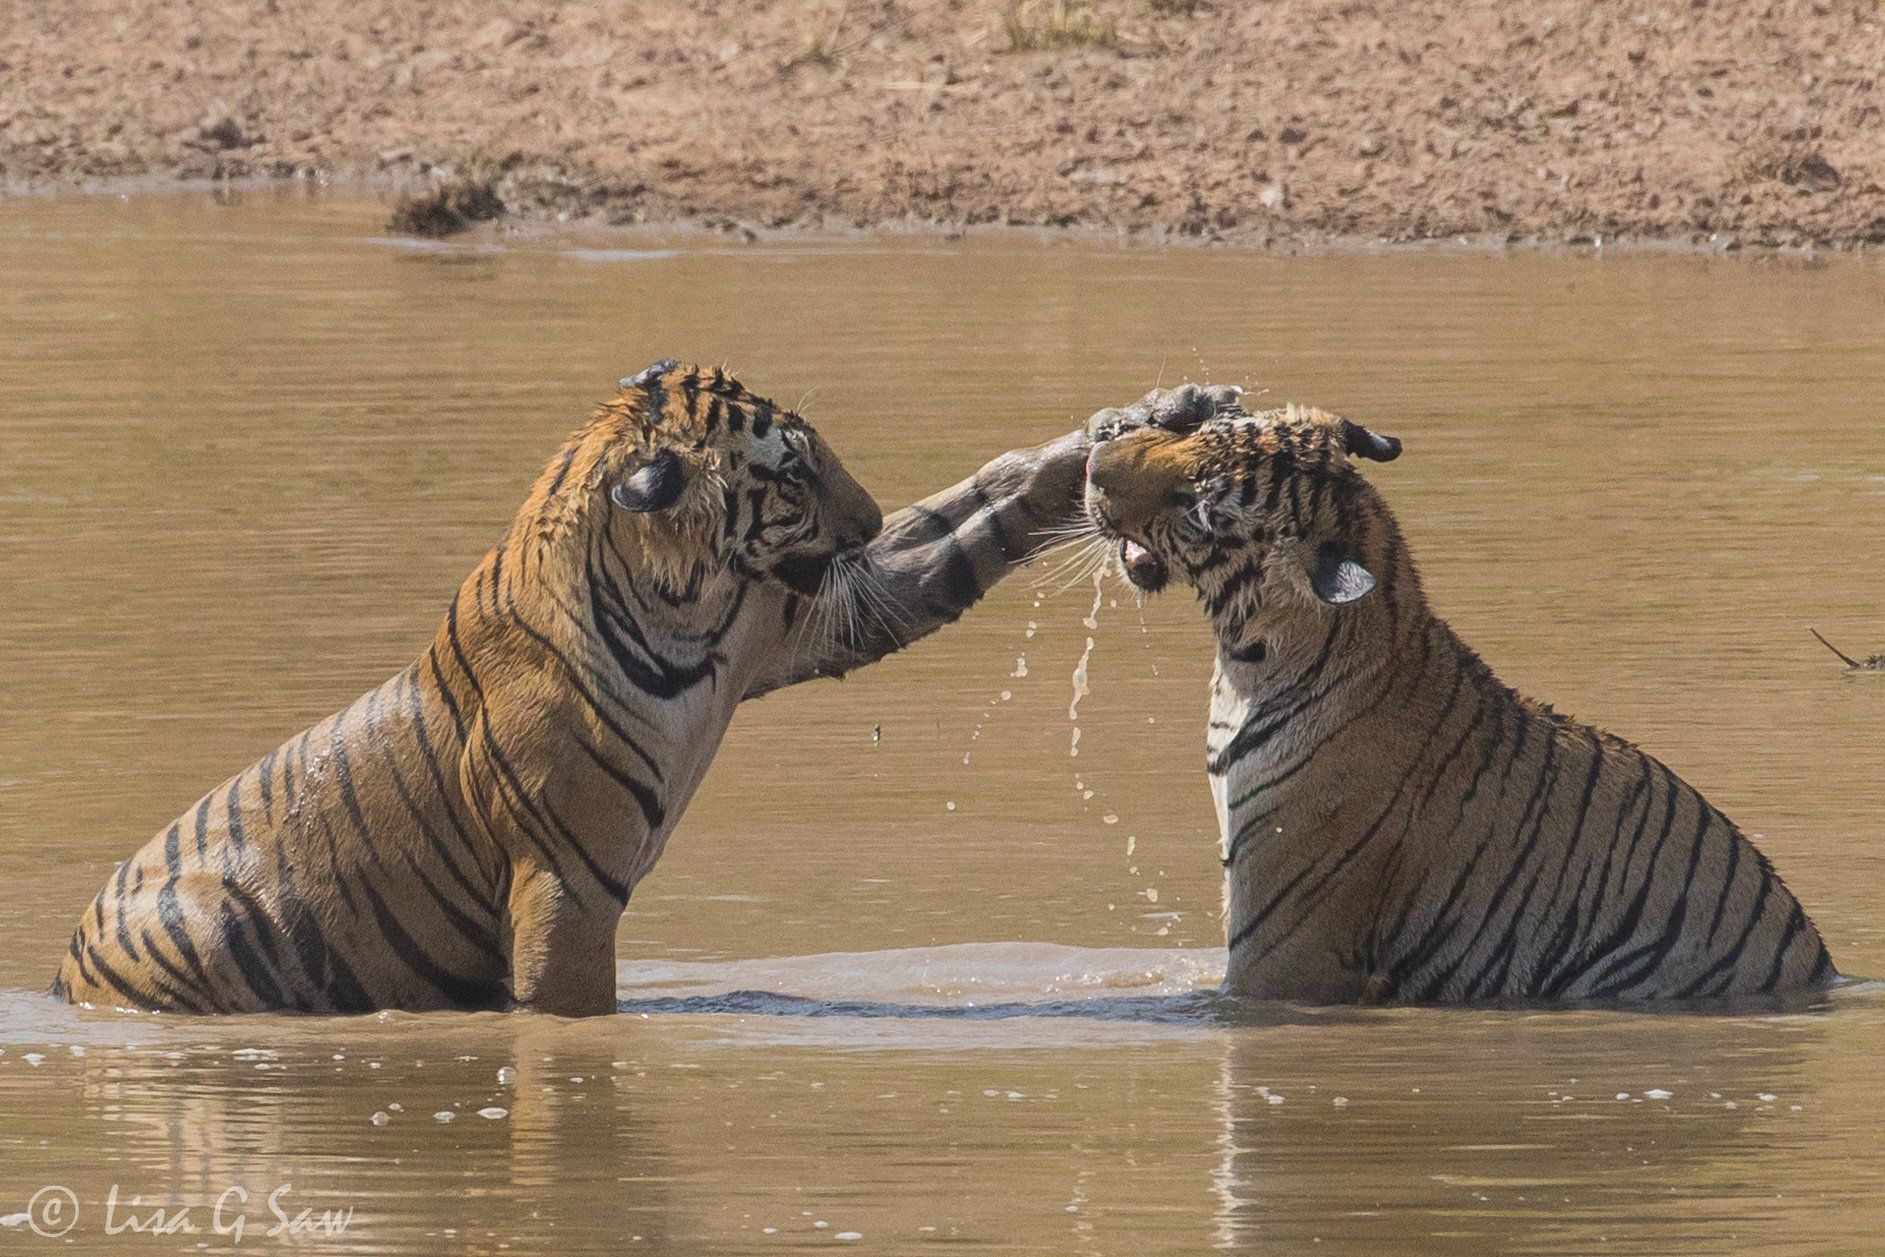 Young tiger in water slapping another on the face